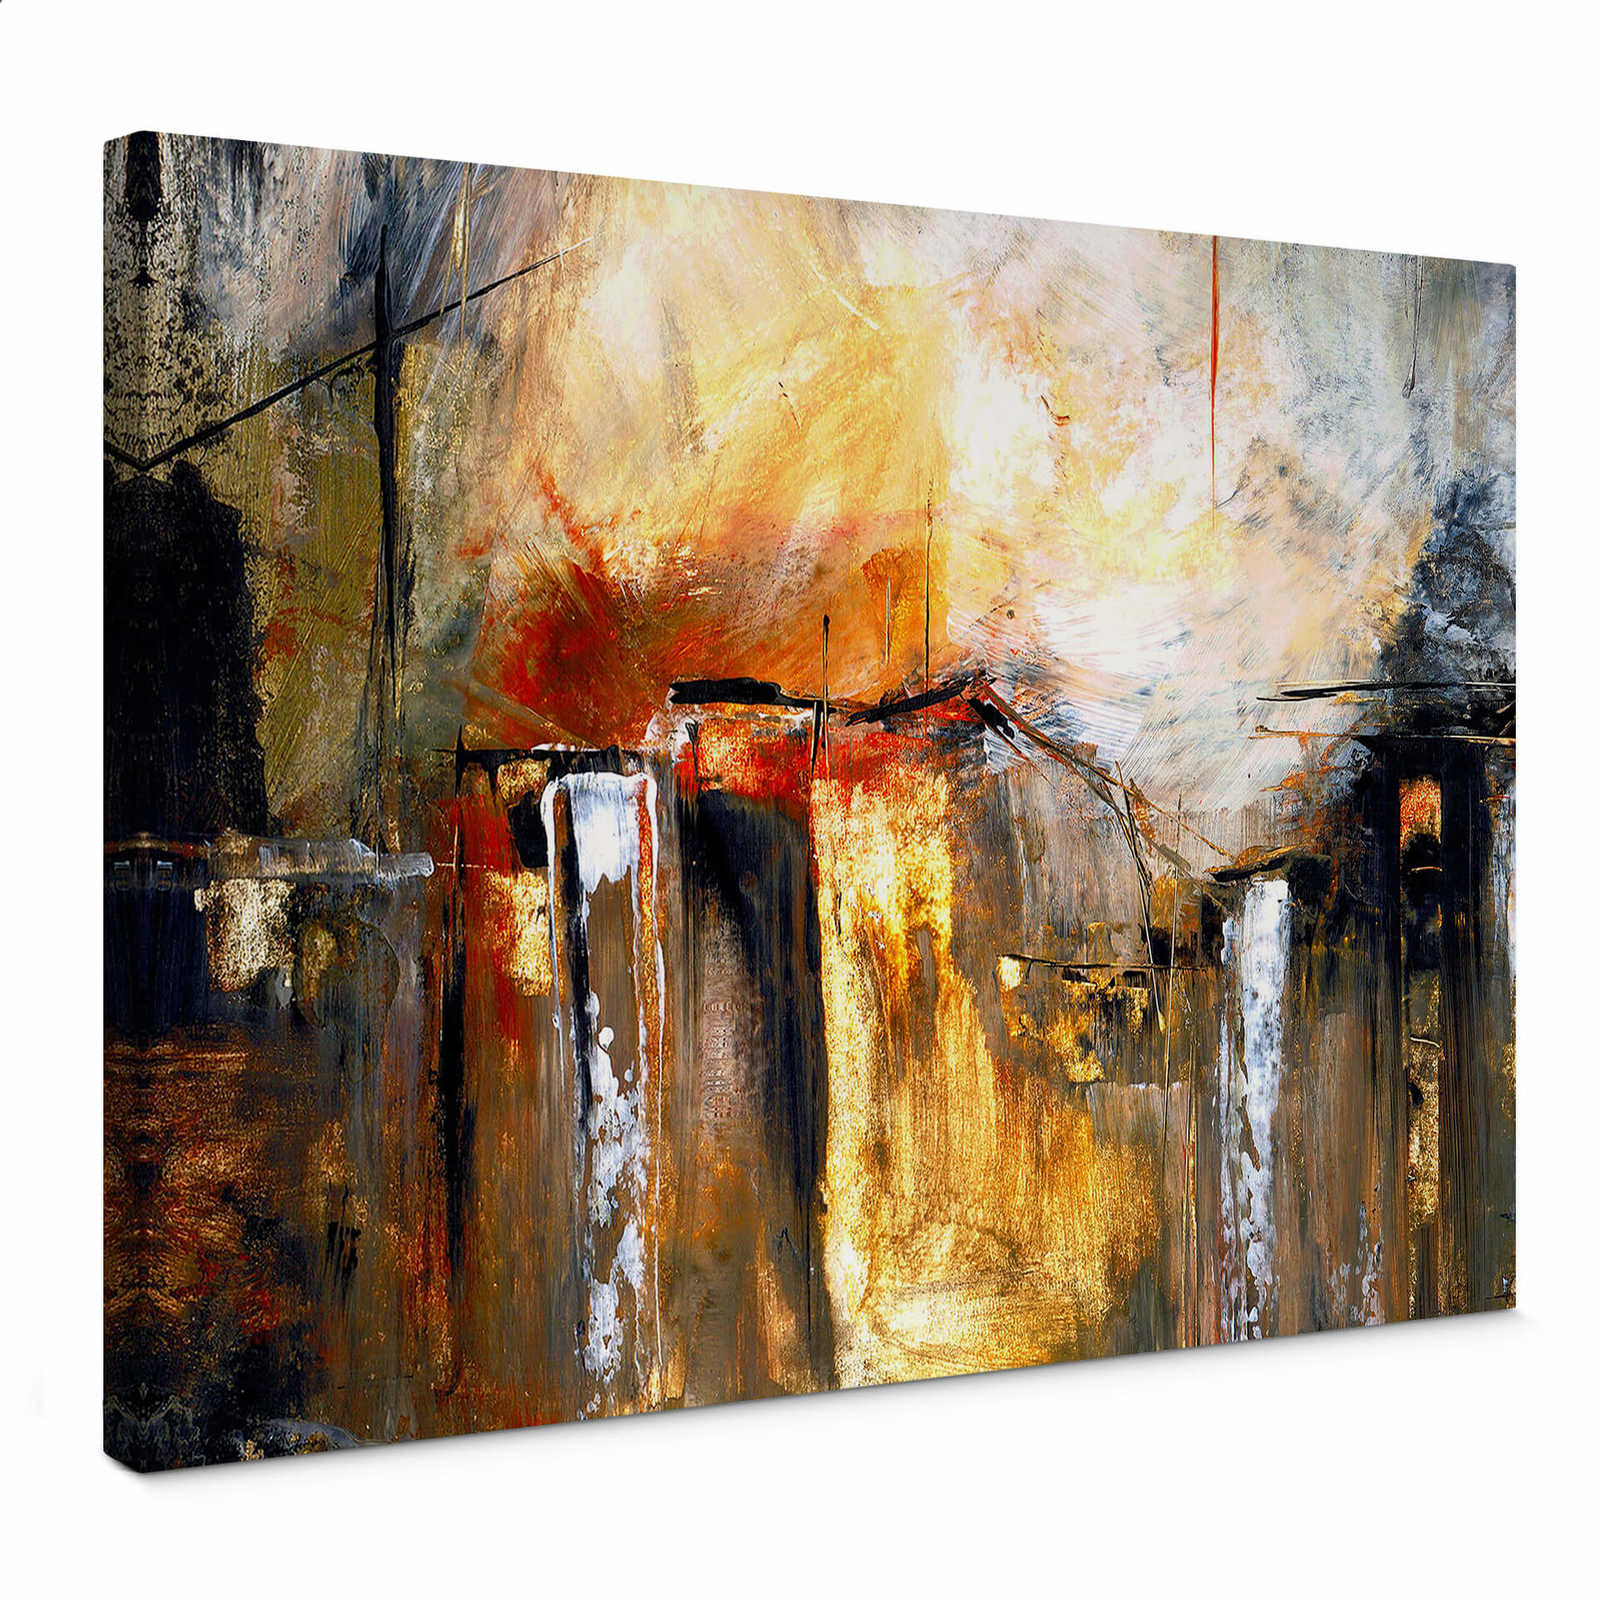         Abstract canvas print print by Niksic
    